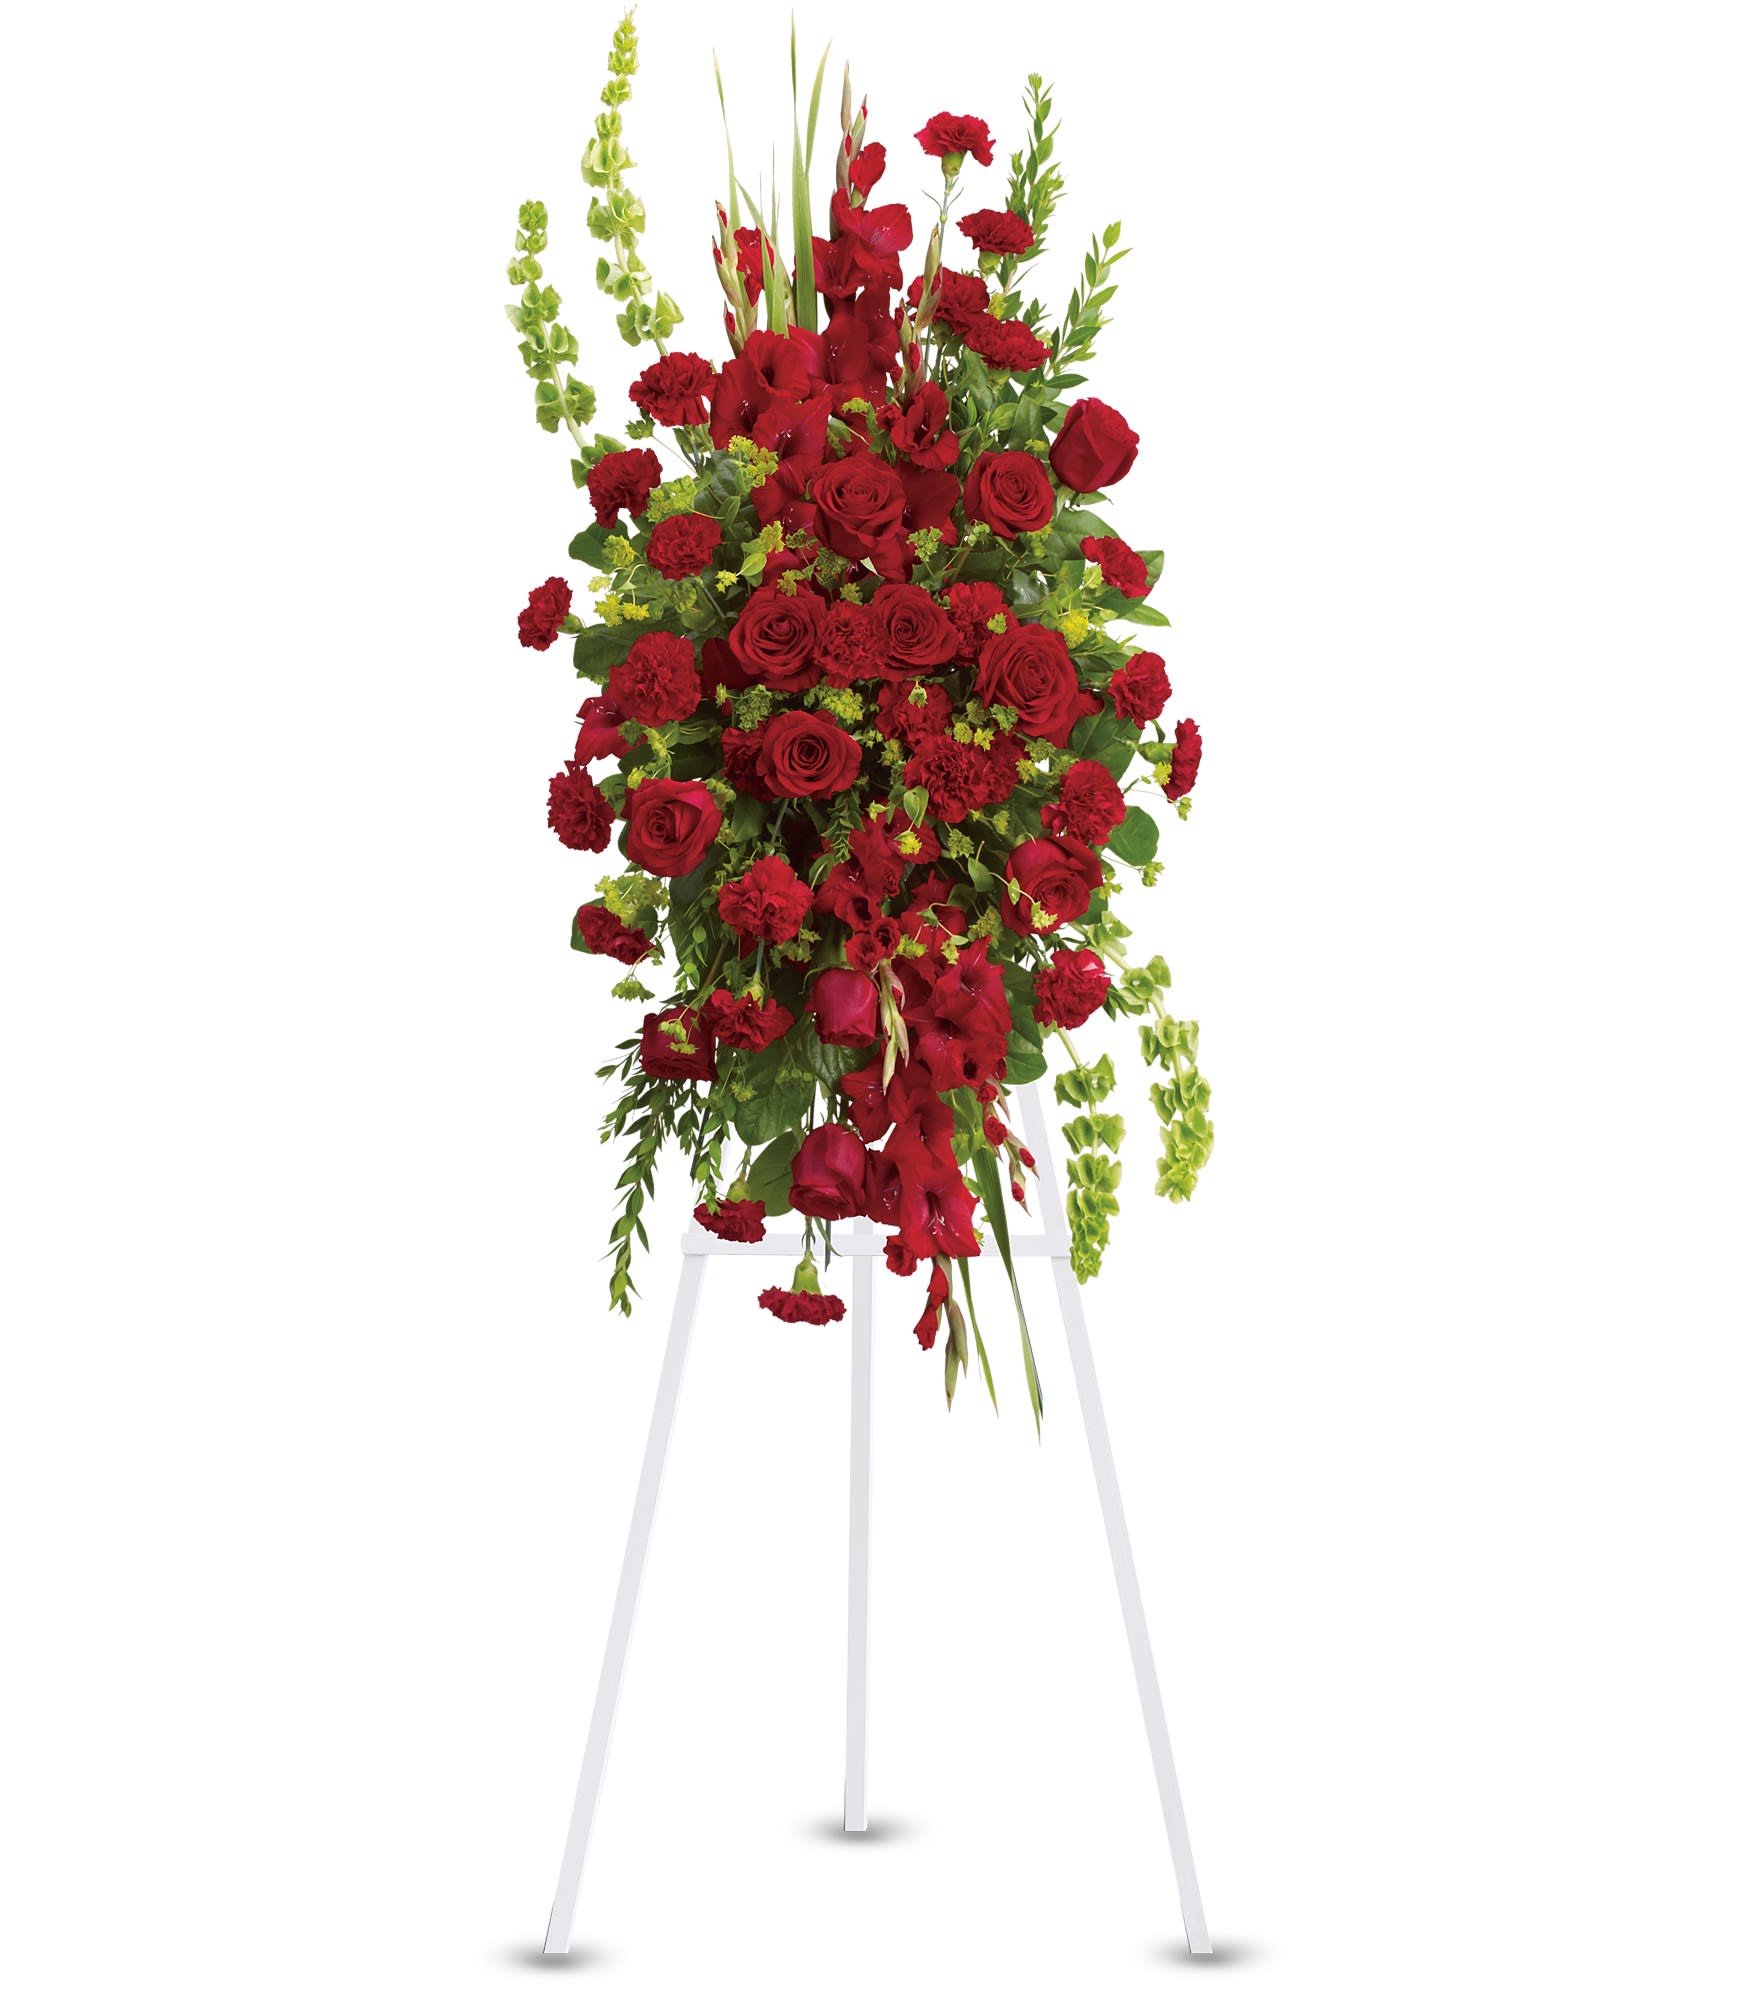 Care and Compassion Spray by Teleflora - Your care and compassion will be appreciated by all who lay eyes on this radiant standing spray. A variety of lovely vibrant red blossoms contrasted by vivid green of bells of Ireland will deliver your heartfelt condolences. Perfectly.  